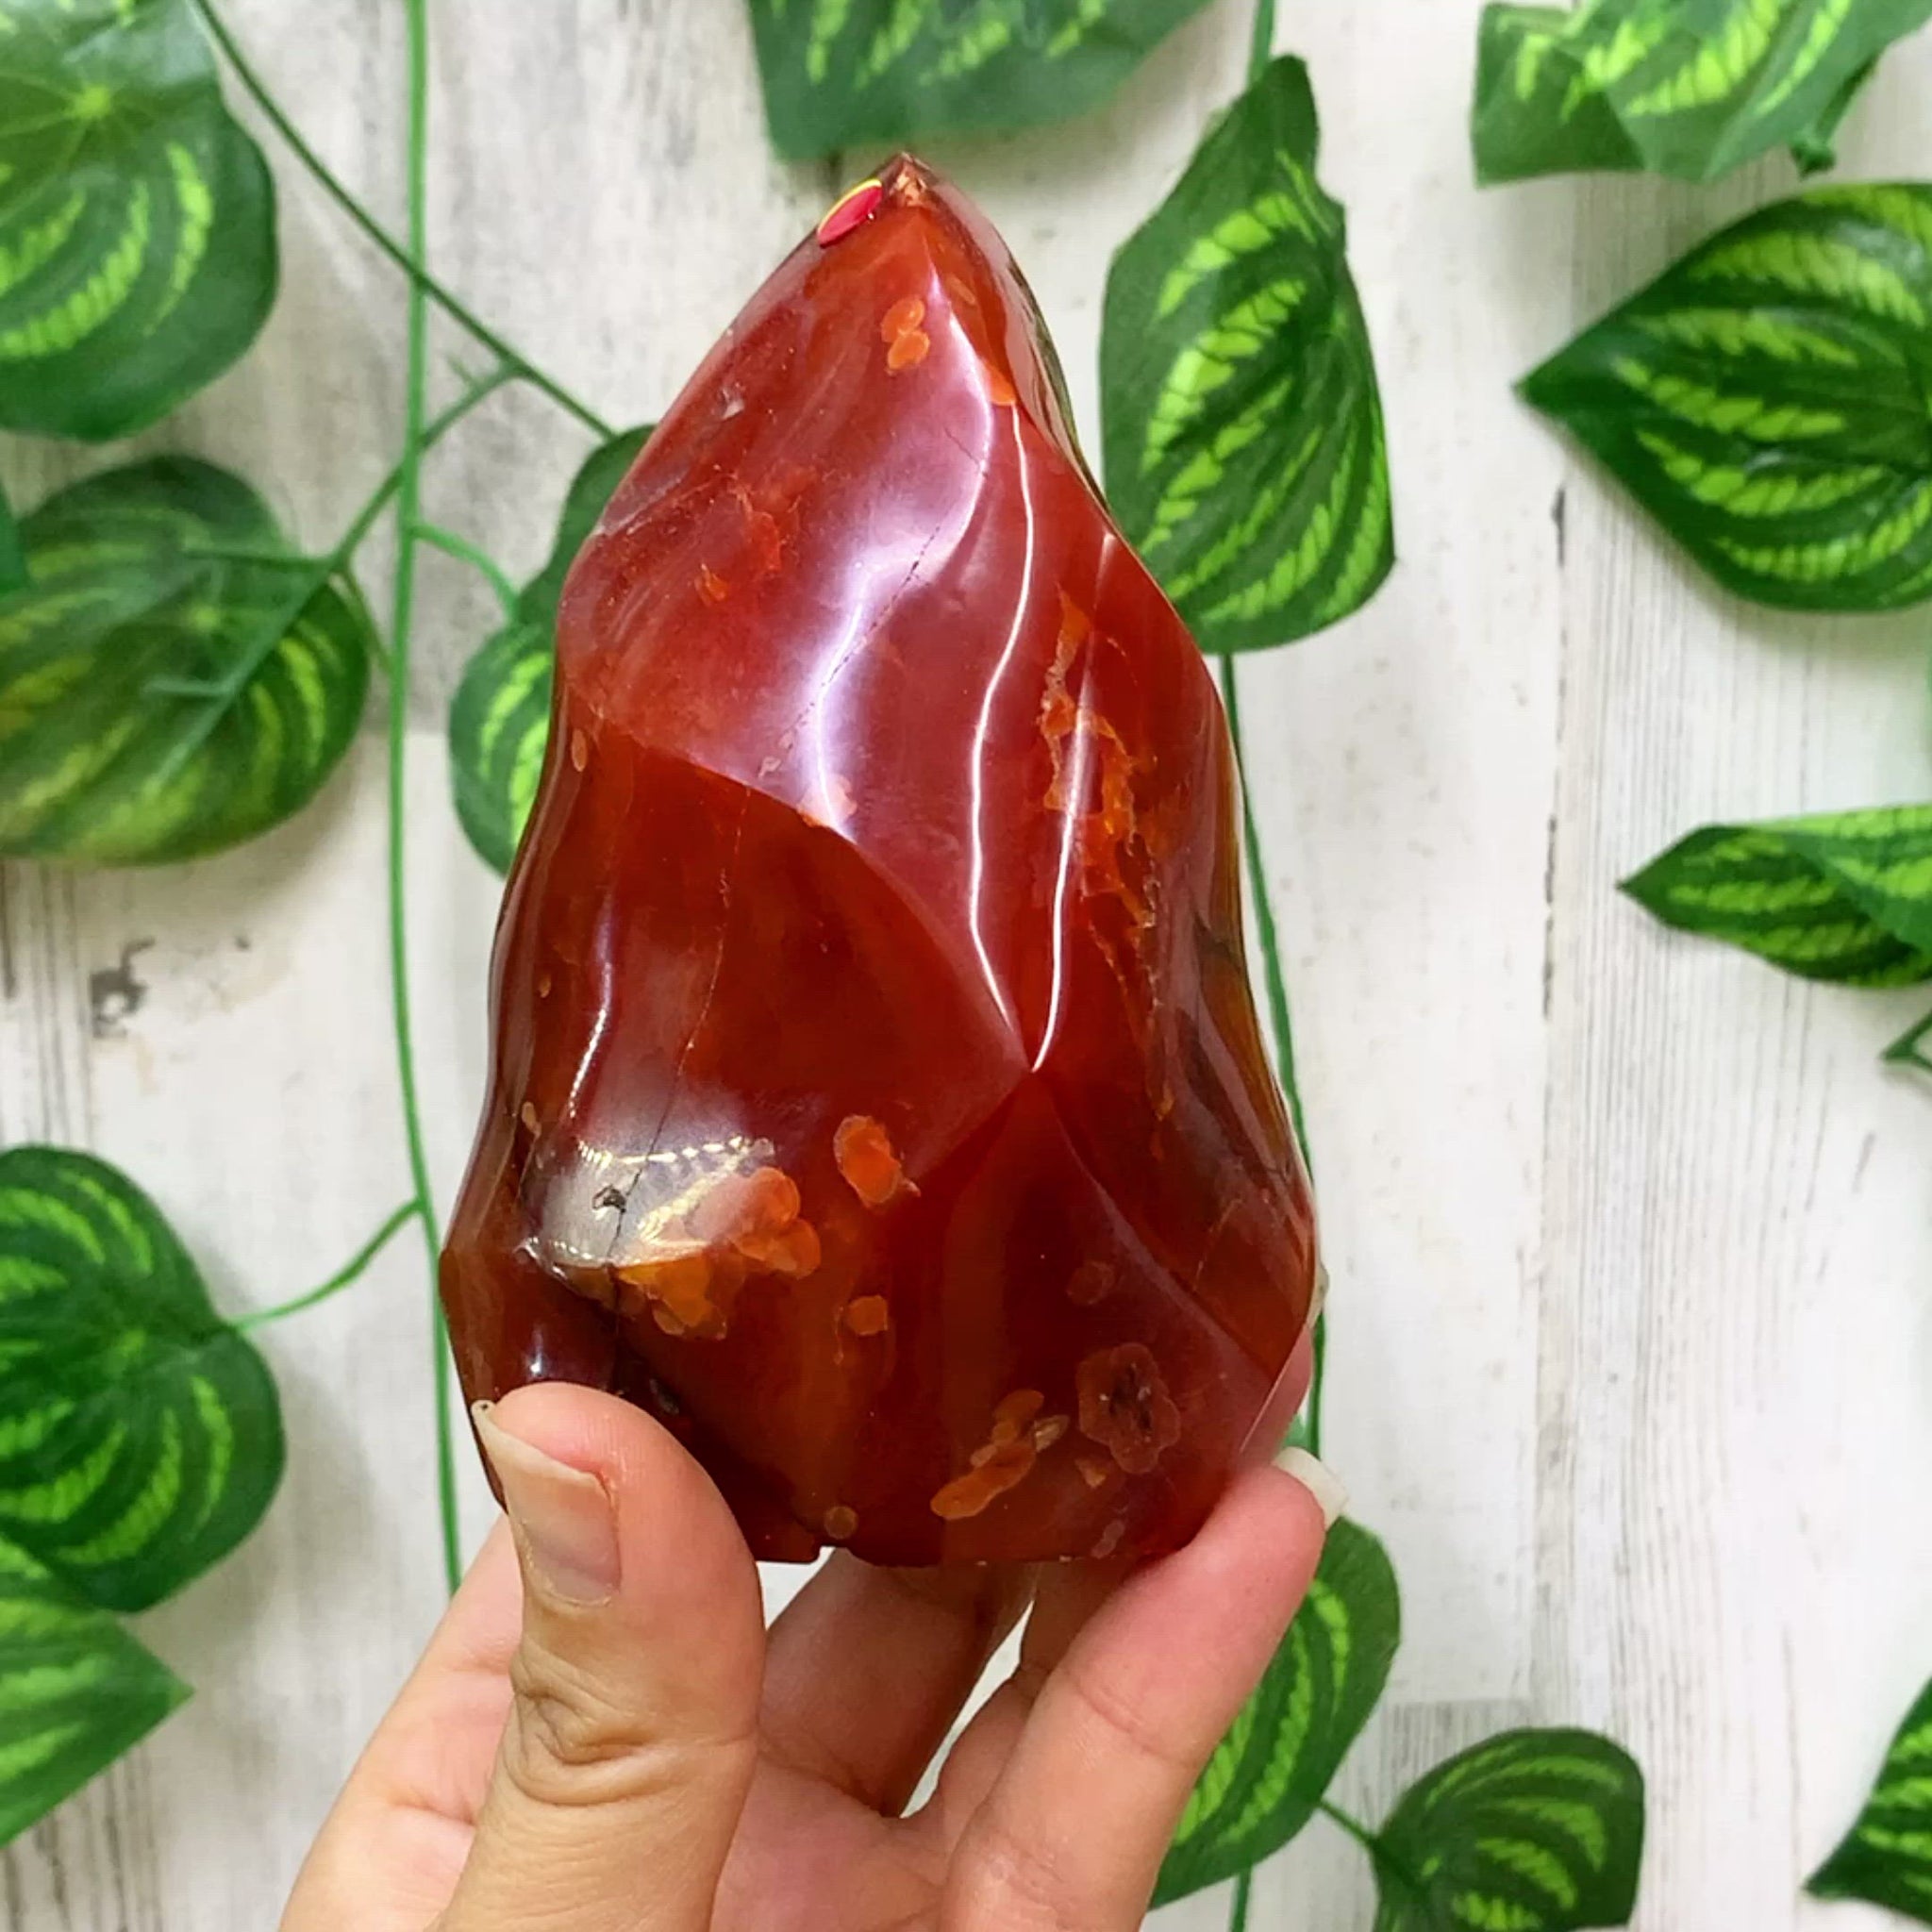 Looking for genuine and stunning Carnelian Crystal Flame? Shop at Magic Crystals for polished cut base carnelian. We only carry 'AAA' Quality Carnelian from India and Madagascar. Red Crystal - D - Tower for reiki Healing. Free Standing Crystal, Beautiful Display Crystal with FREE SHIPPING AVAILABLE.